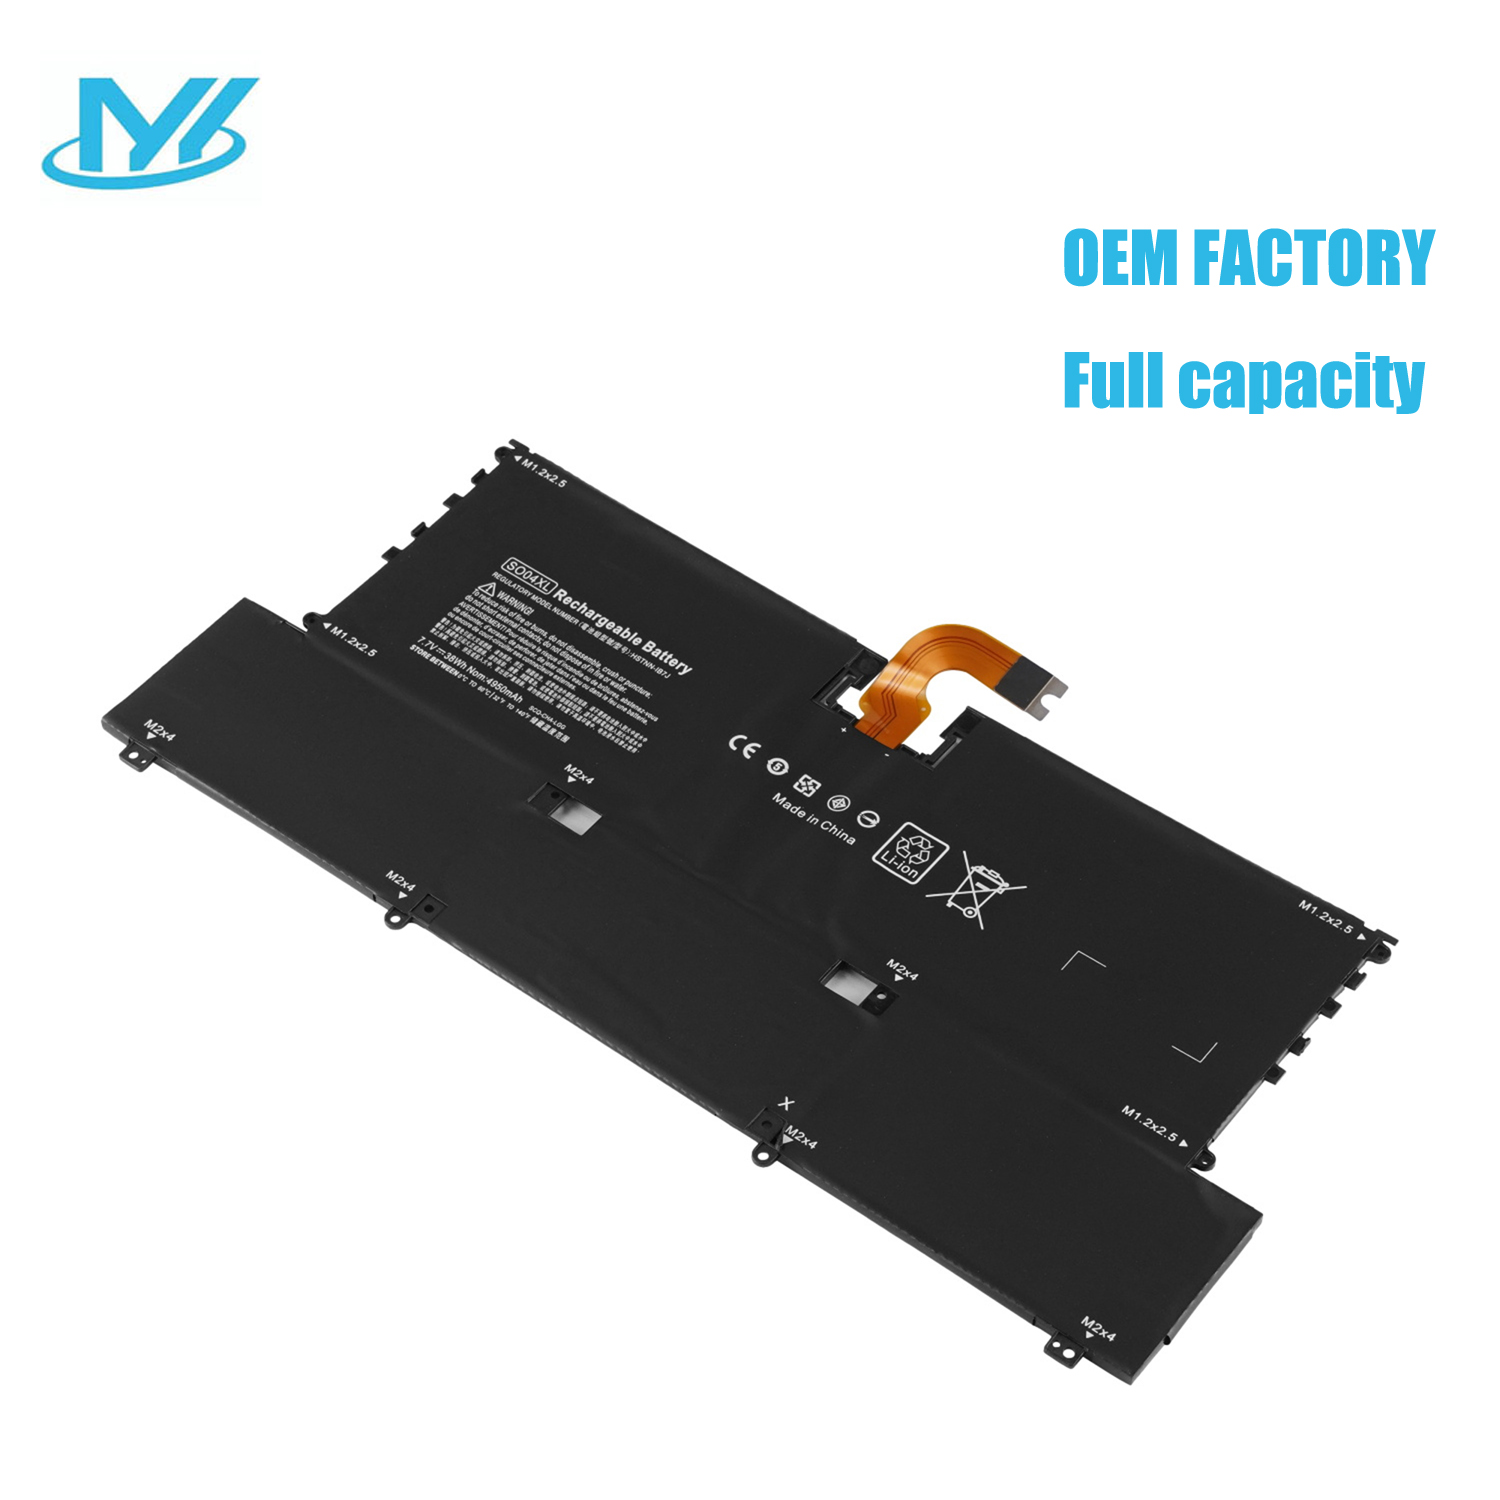 SO04XL rechargeable lithium ion Notebook battery Laptop battery For HP Spectre 13 13-V016TU 13-V015TU 13-V000 843534-1C1 7.7V 38Wh 4950mAh 4cell